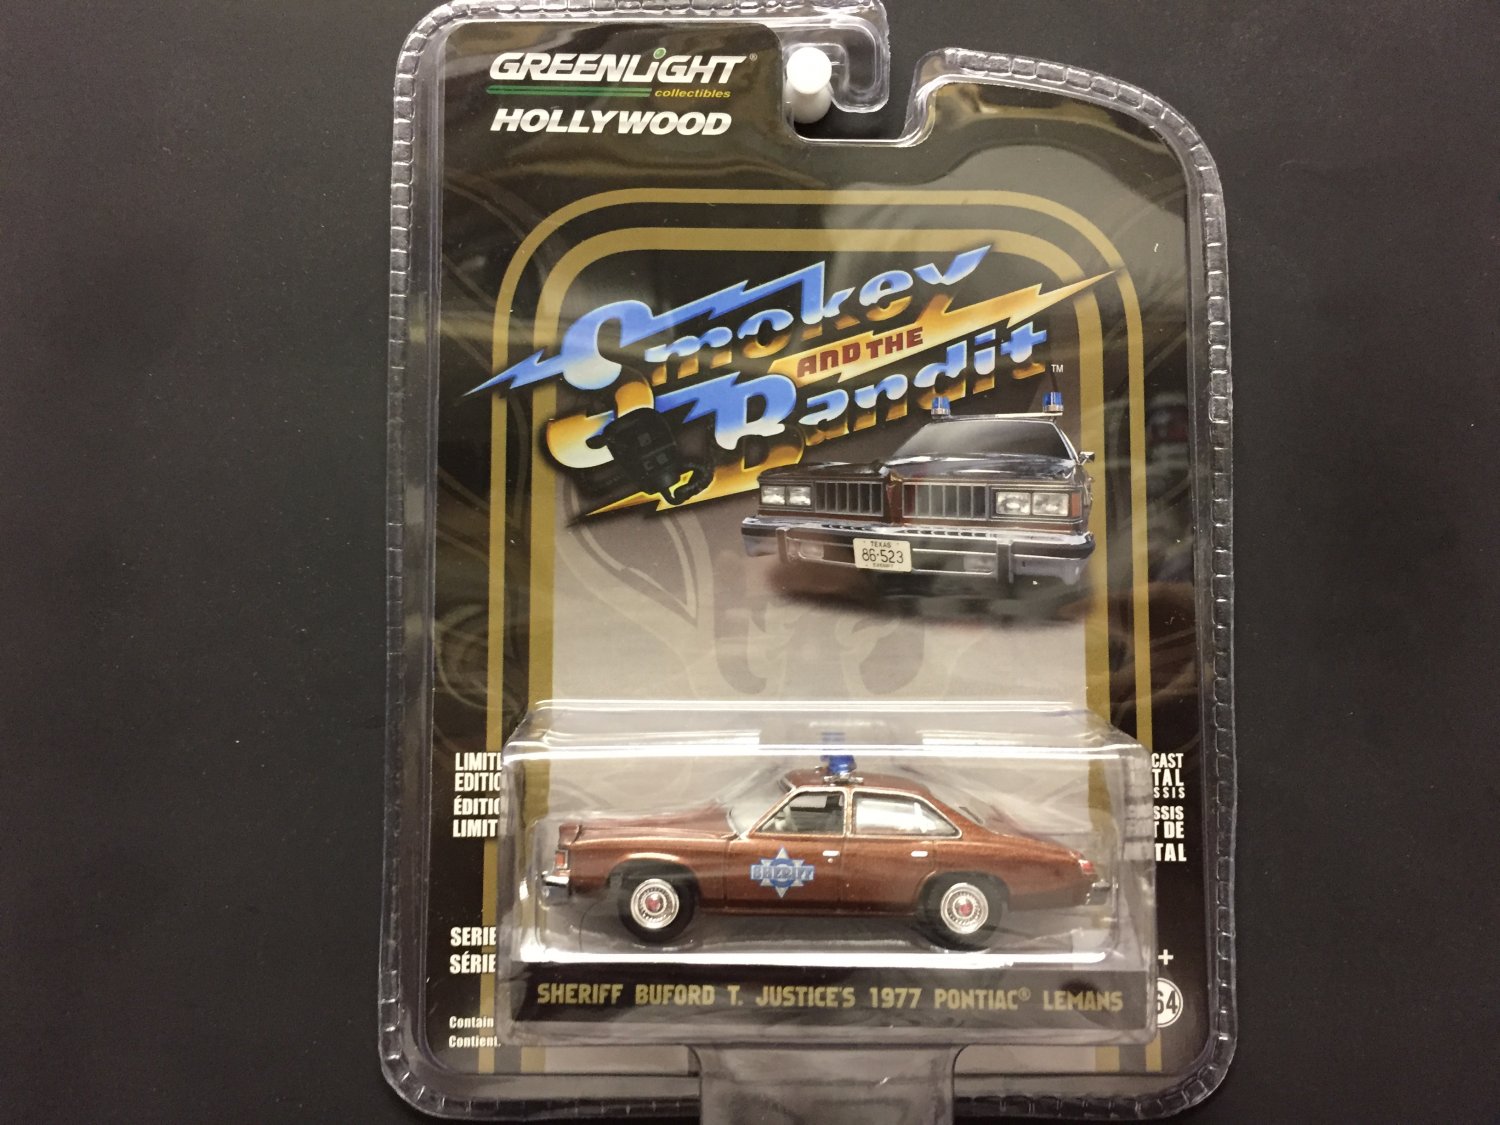 greenlight 1977 bufford t justice s pontiac lemans police car vintage tin metal signs vintage hot wheels canada johnny lightning greenlight diecast toys movin on franklin mint bj and the bear collectibles revell model kits cb radio manuals terry macalmon ecrater